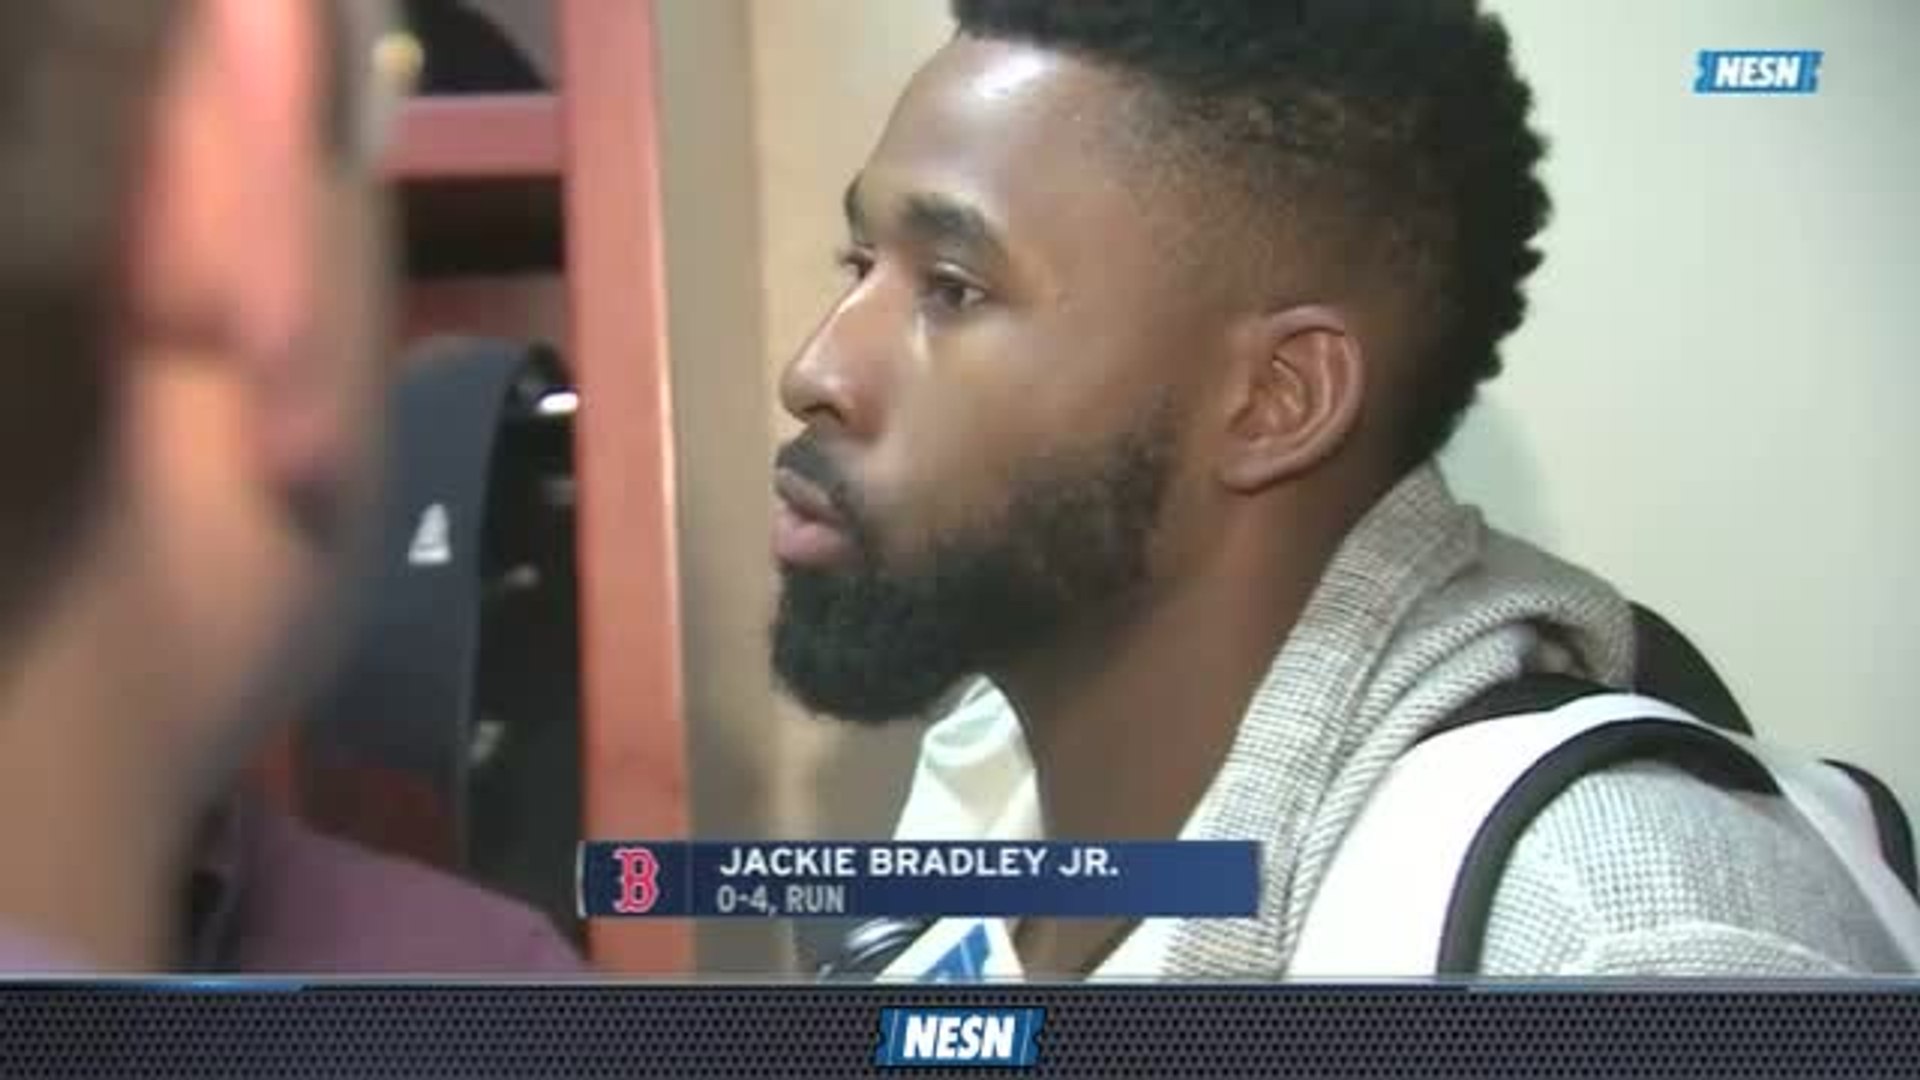 Jackie Bradley Jr. unleashed an insane 11th inning throw to save the Red Sox